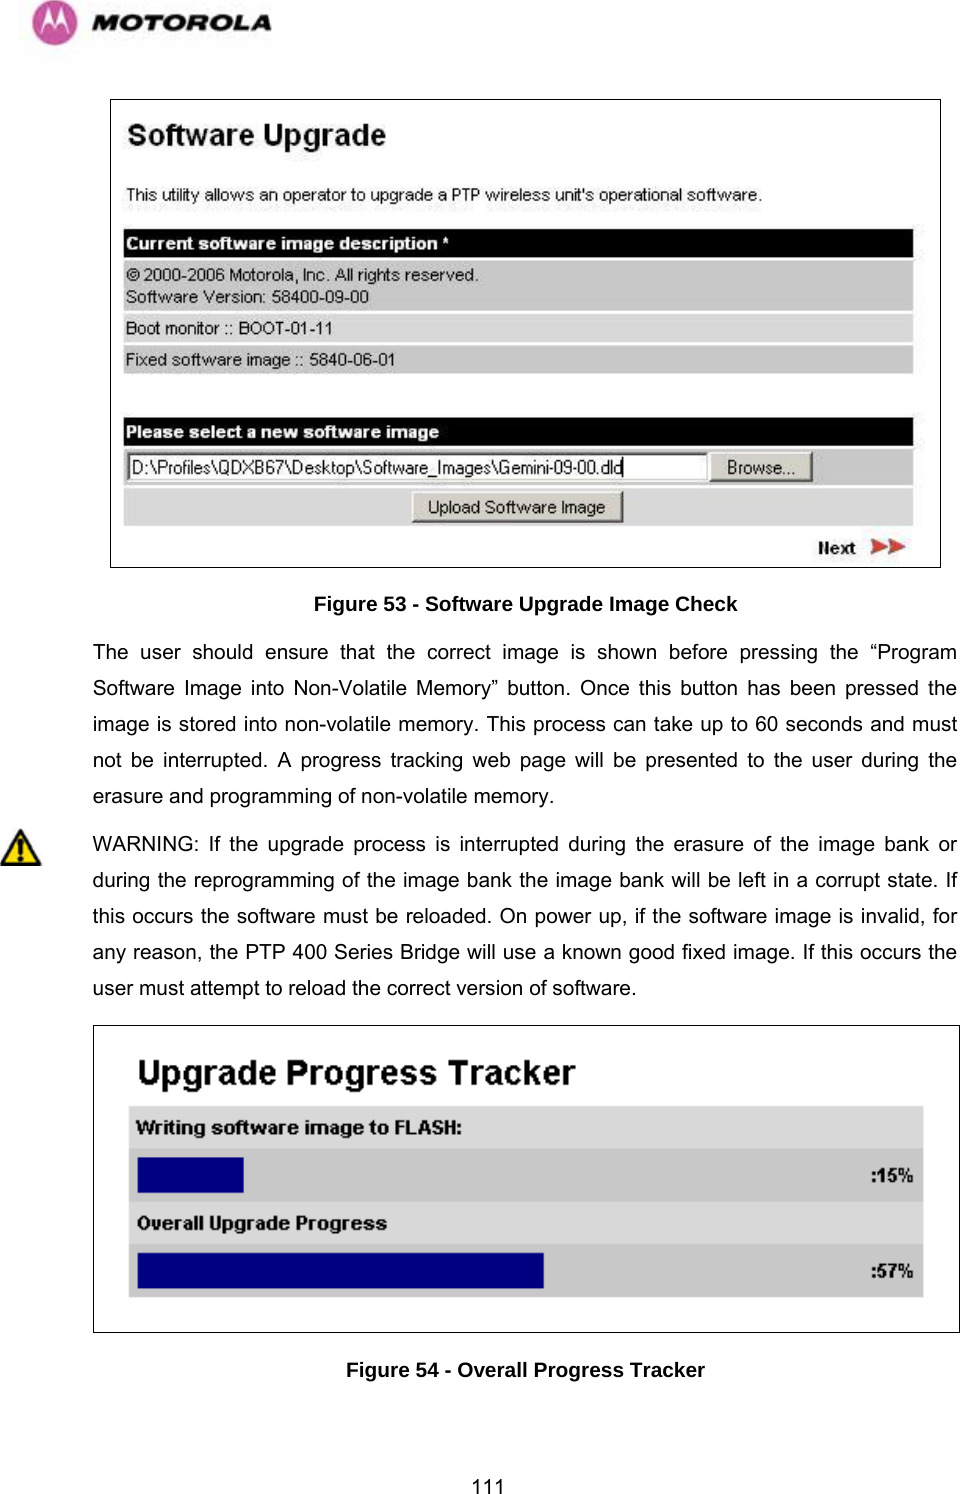   111 Figure 53 - Software Upgrade Image Check The user should ensure that the correct image is shown before pressing the “Program Software Image into Non-Volatile Memory” button. Once this button has been pressed the image is stored into non-volatile memory. This process can take up to 60 seconds and must not be interrupted. A progress tracking web page will be presented to the user during the erasure and programming of non-volatile memory. WARNING: If the upgrade process is interrupted during the erasure of the image bank or during the reprogramming of the image bank the image bank will be left in a corrupt state. If this occurs the software must be reloaded. On power up, if the software image is invalid, for any reason, the PTP 400 Series Bridge will use a known good fixed image. If this occurs the user must attempt to reload the correct version of software.  Figure 54 - Overall Progress Tracker 